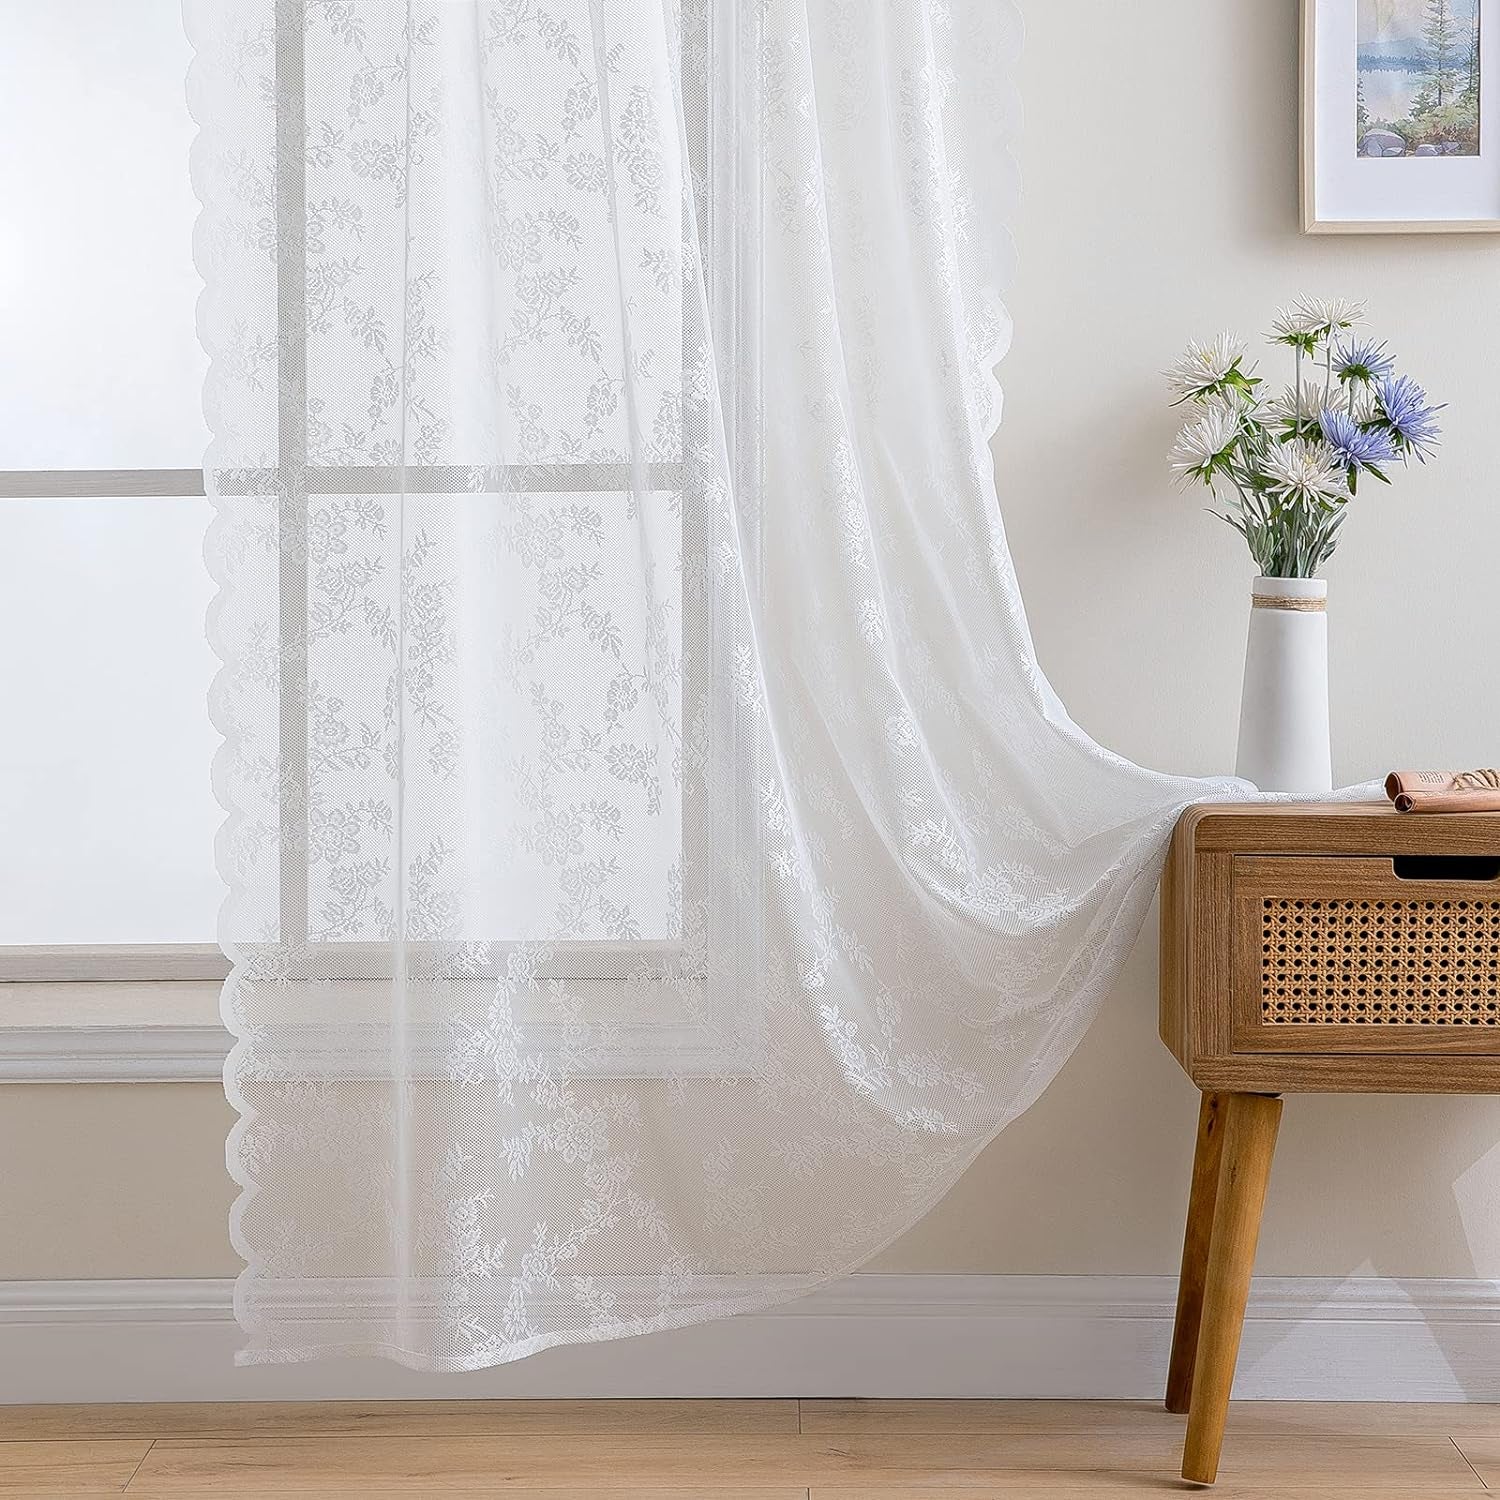 MIULEE White Lace Curtains 84 Inches Long for Living Room Bedroom, Scalloped Sheer Curtains Rose Floral Embroidered Farmhouse Window Drapes Vintage European Tulle Retro Style, Rod Pocket, 2 Panels Set  MIULEE   